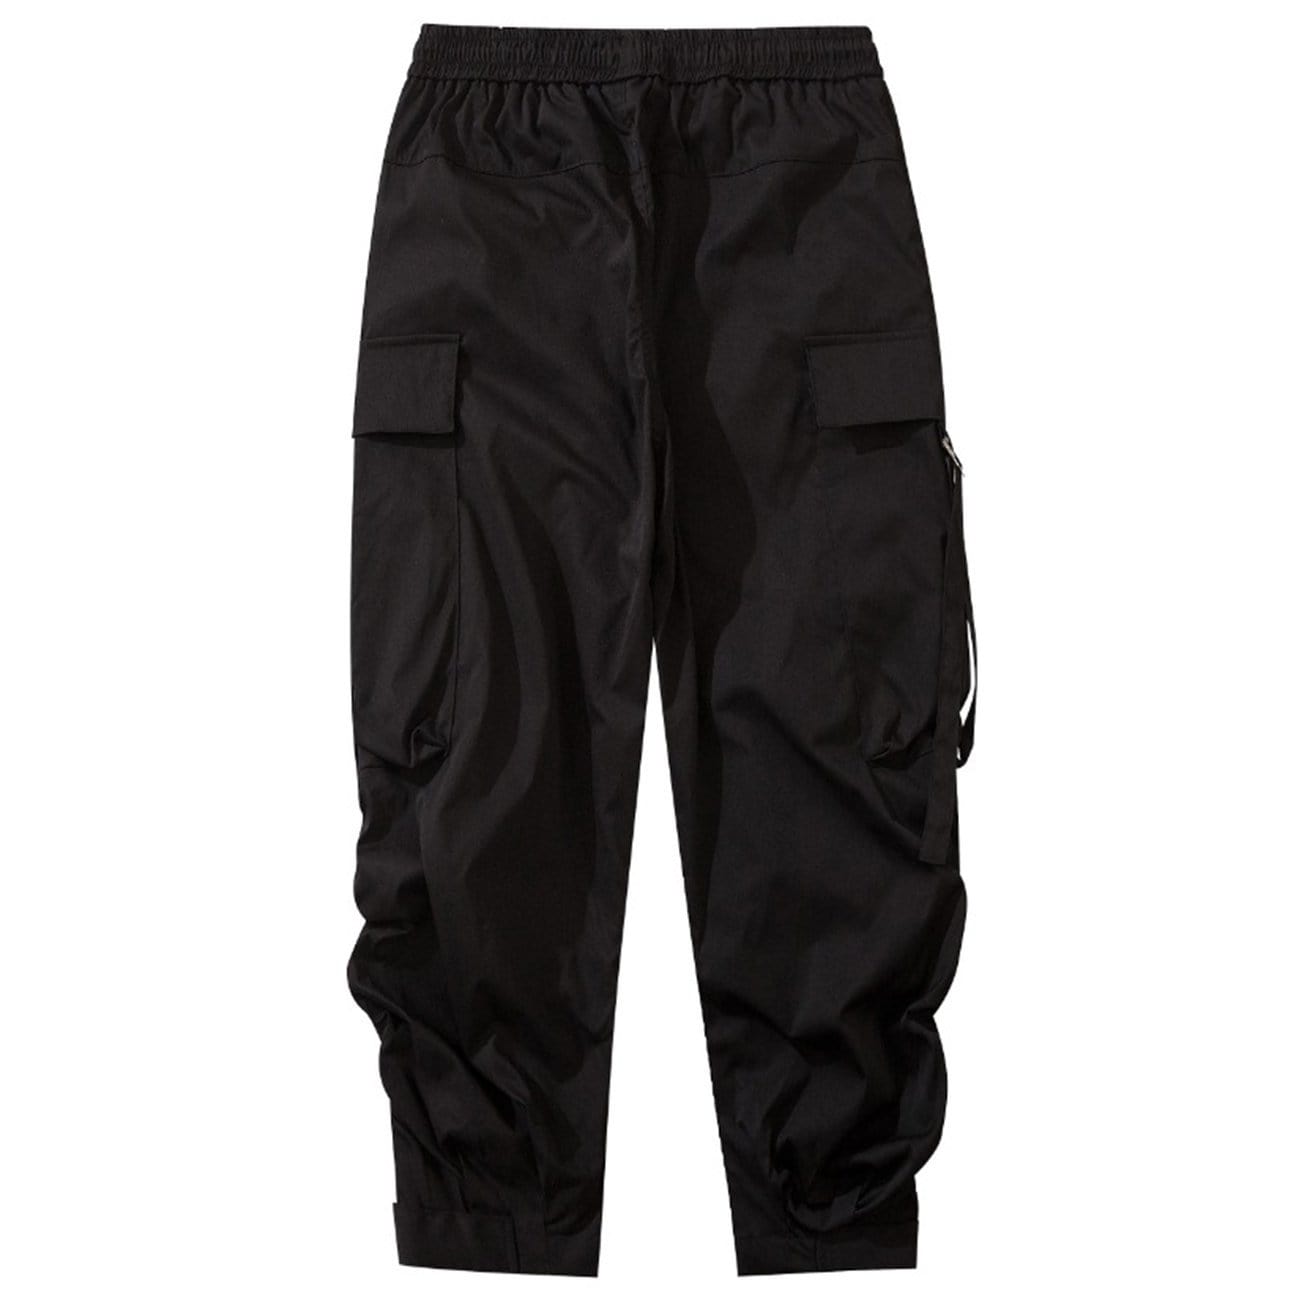 TO Ribbon Fold Buckle Cargo Pants